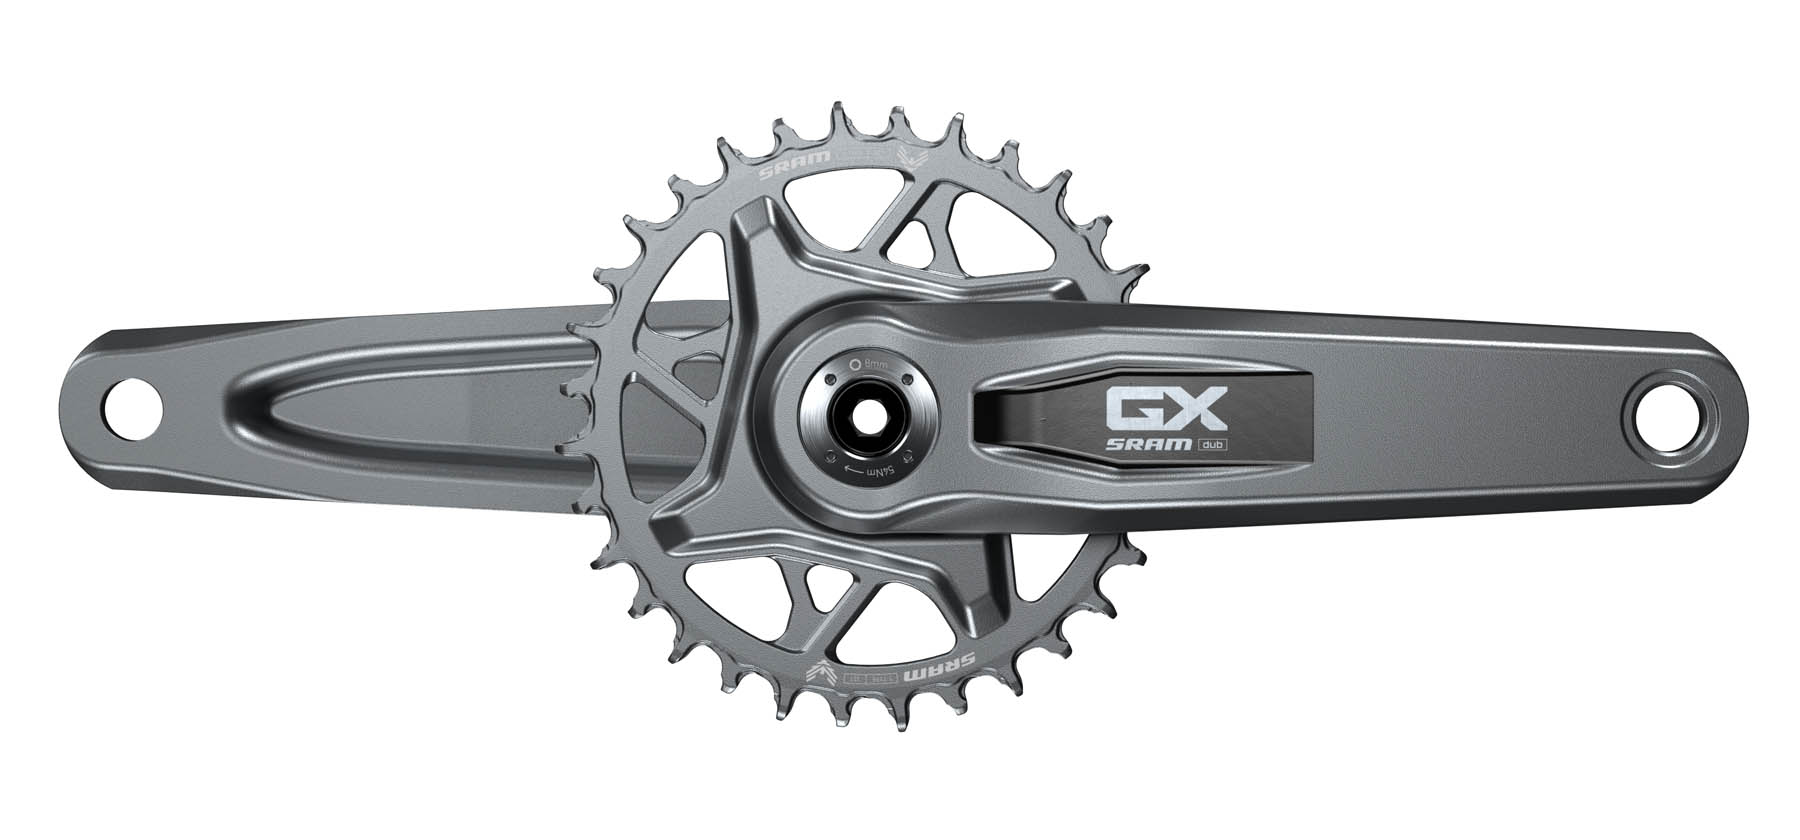 David Golay reviews the SRAM GX Transmission for Blister